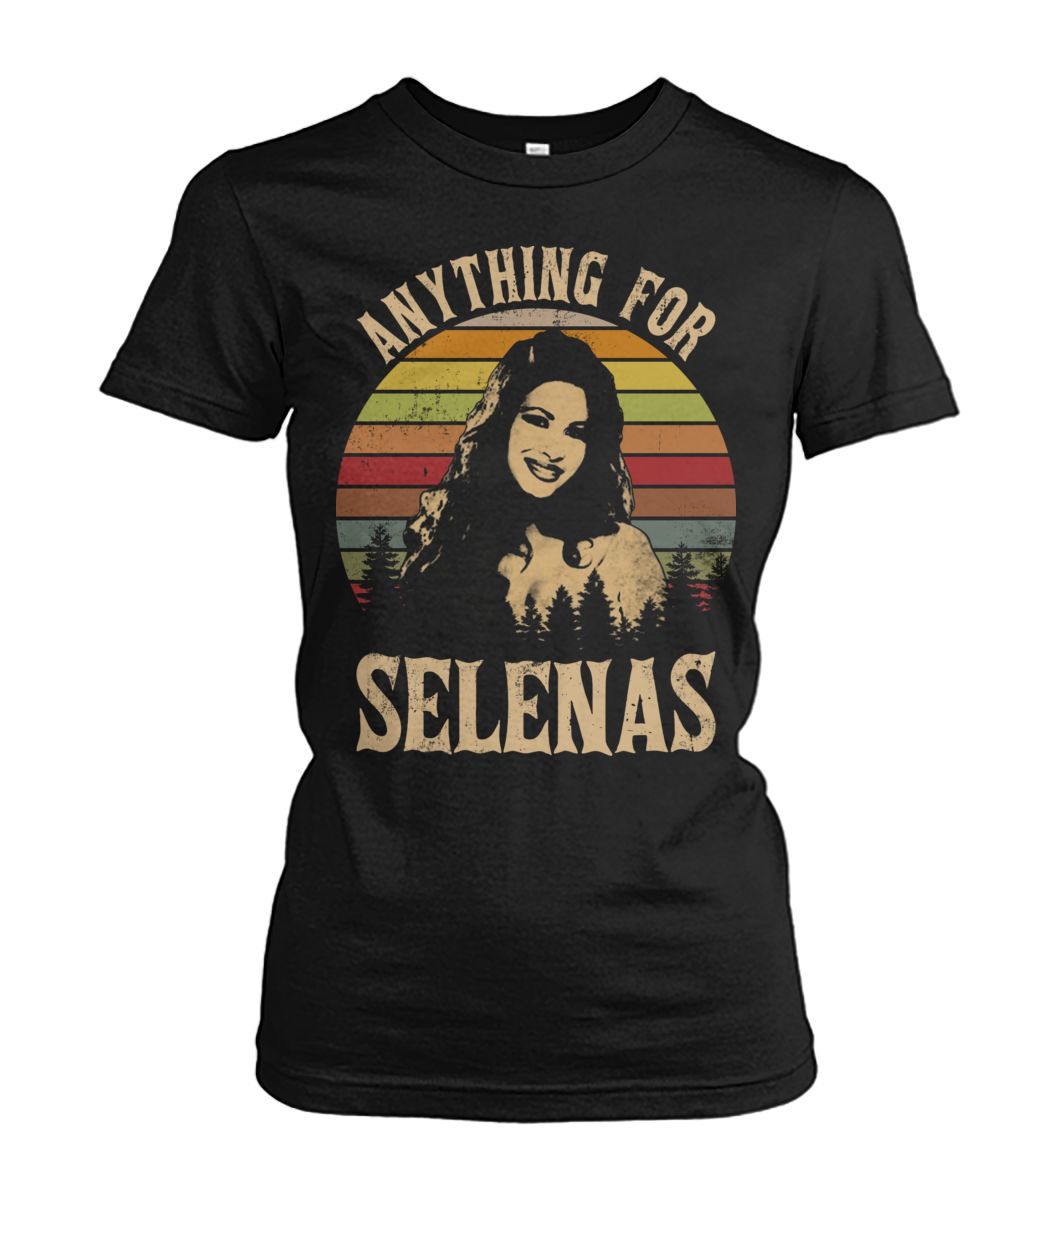 Vintage anything for selenas women's crew tee